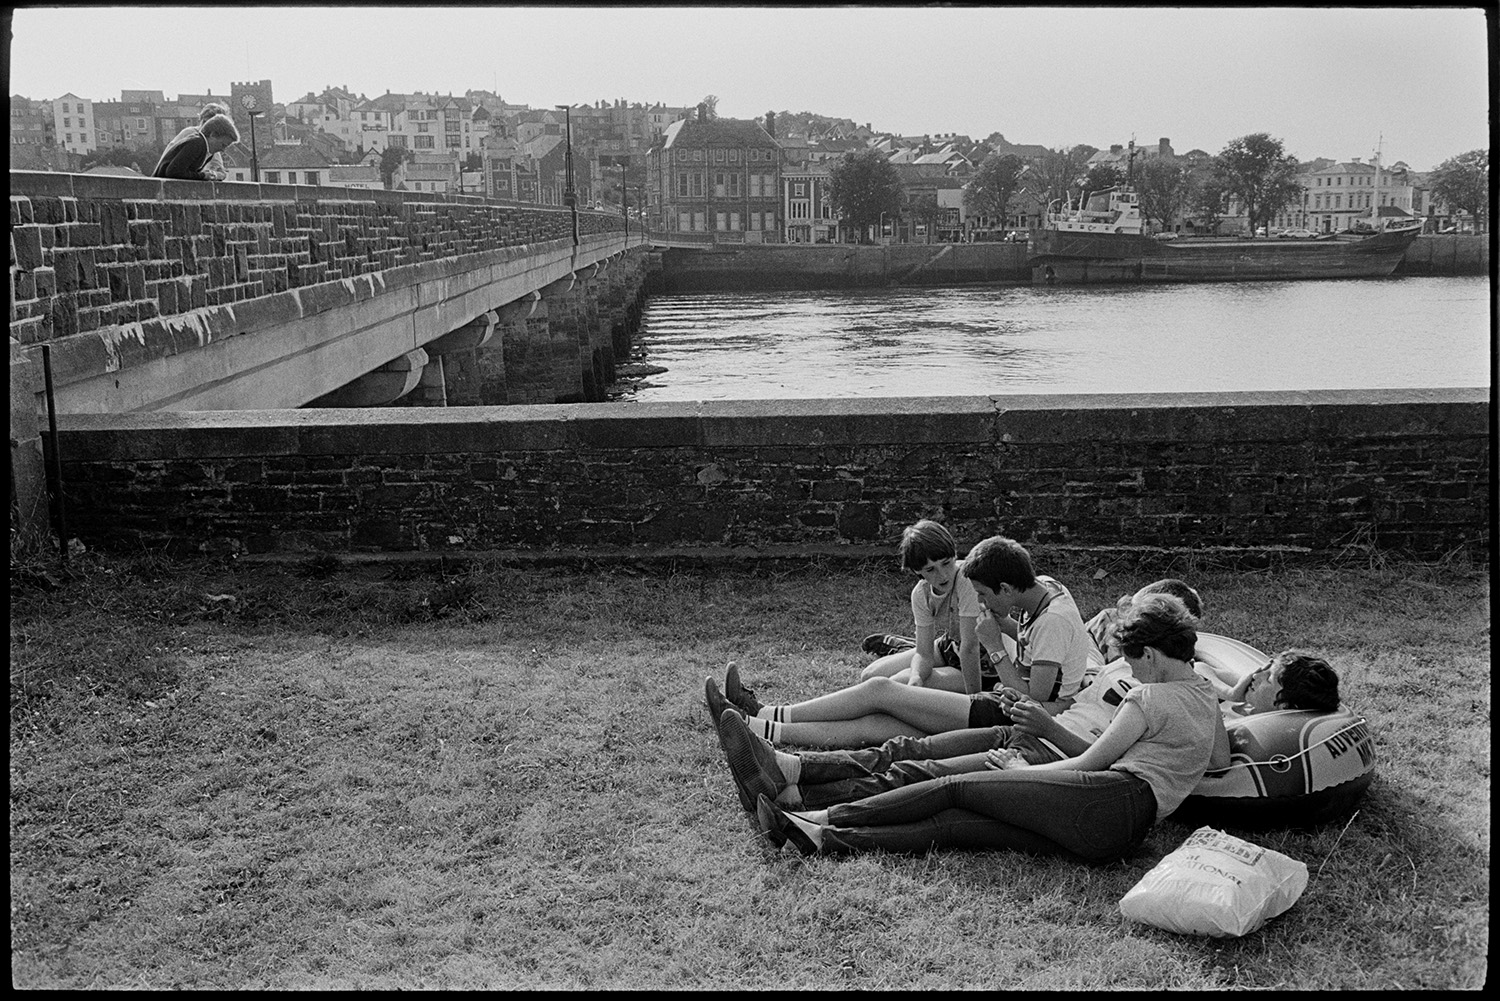 Youths lying beside river on grass, bridge behind. 
[Boys sat on grass beside the River Torridge at Bideford. One of them is resting on an inflatable dinghy or boat. Bideford Long Bridge, also known as Bideford Old Bridge, can be seen in the background along with houses on the opposite side of the river.]